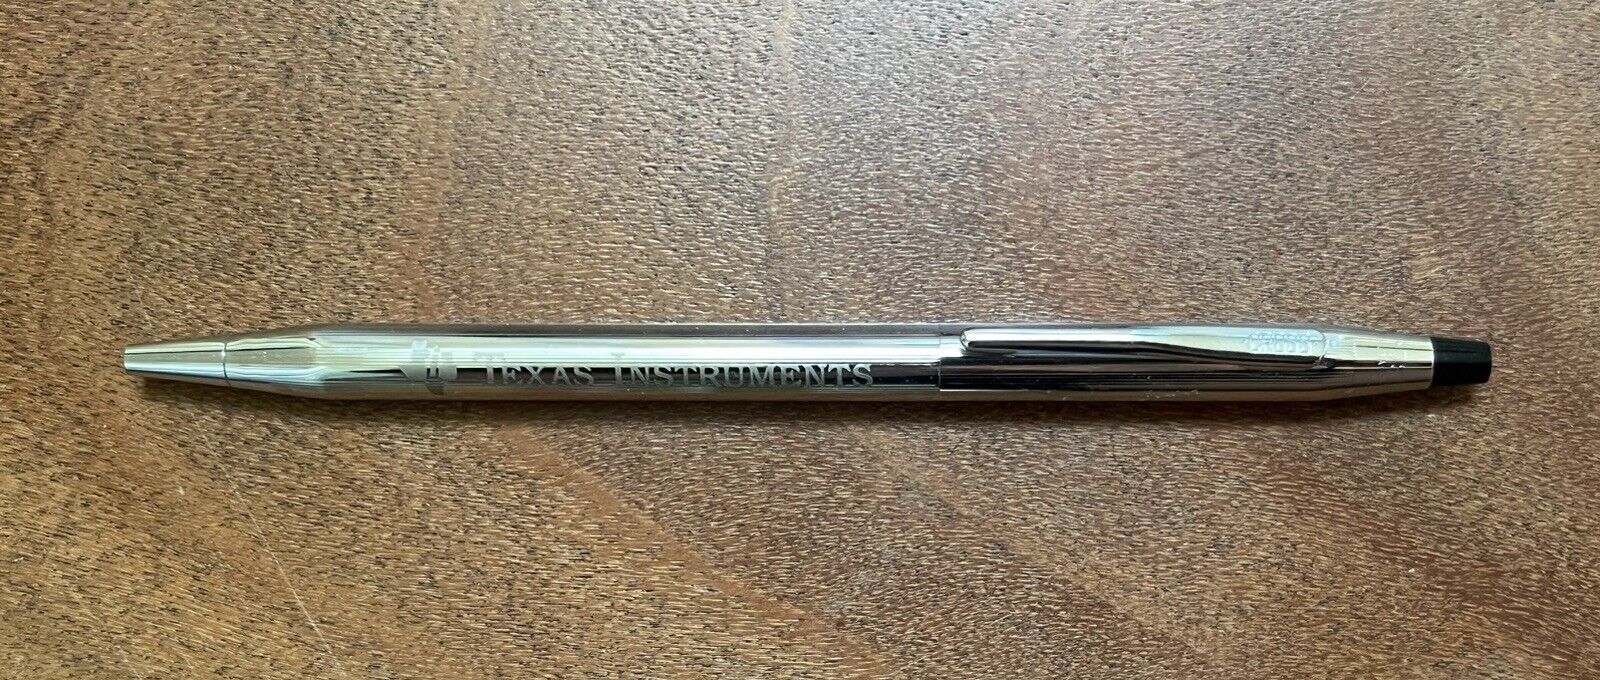 Cross Classic Sterling Silver Ballpoint Pen From Texas Instruments